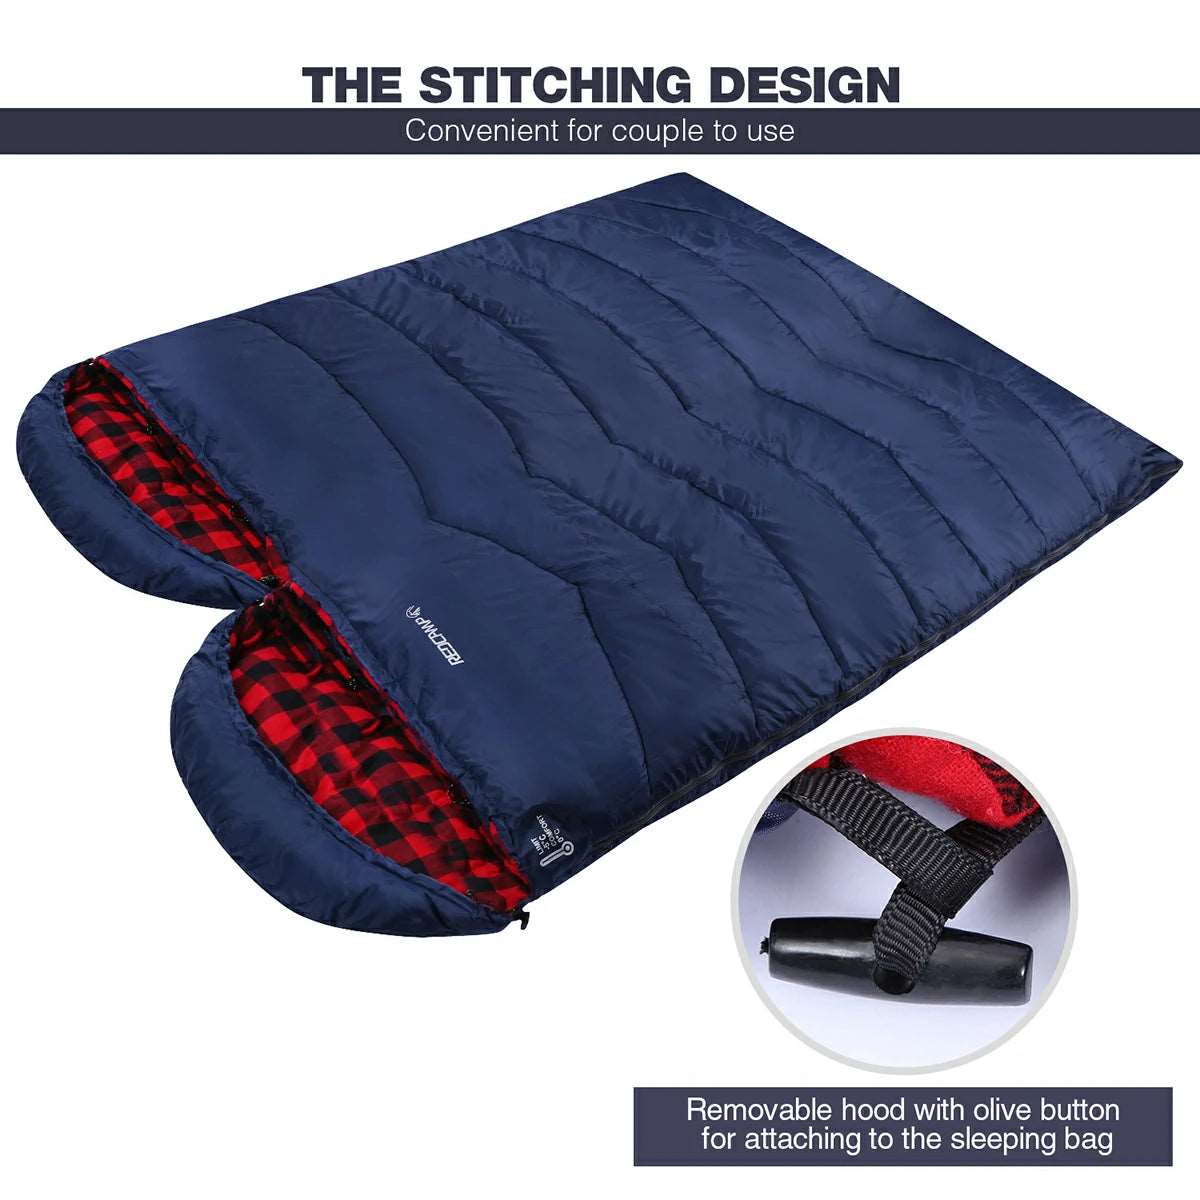 Cotton Flannel Sleeping Bag with Detachable Hood for Adults